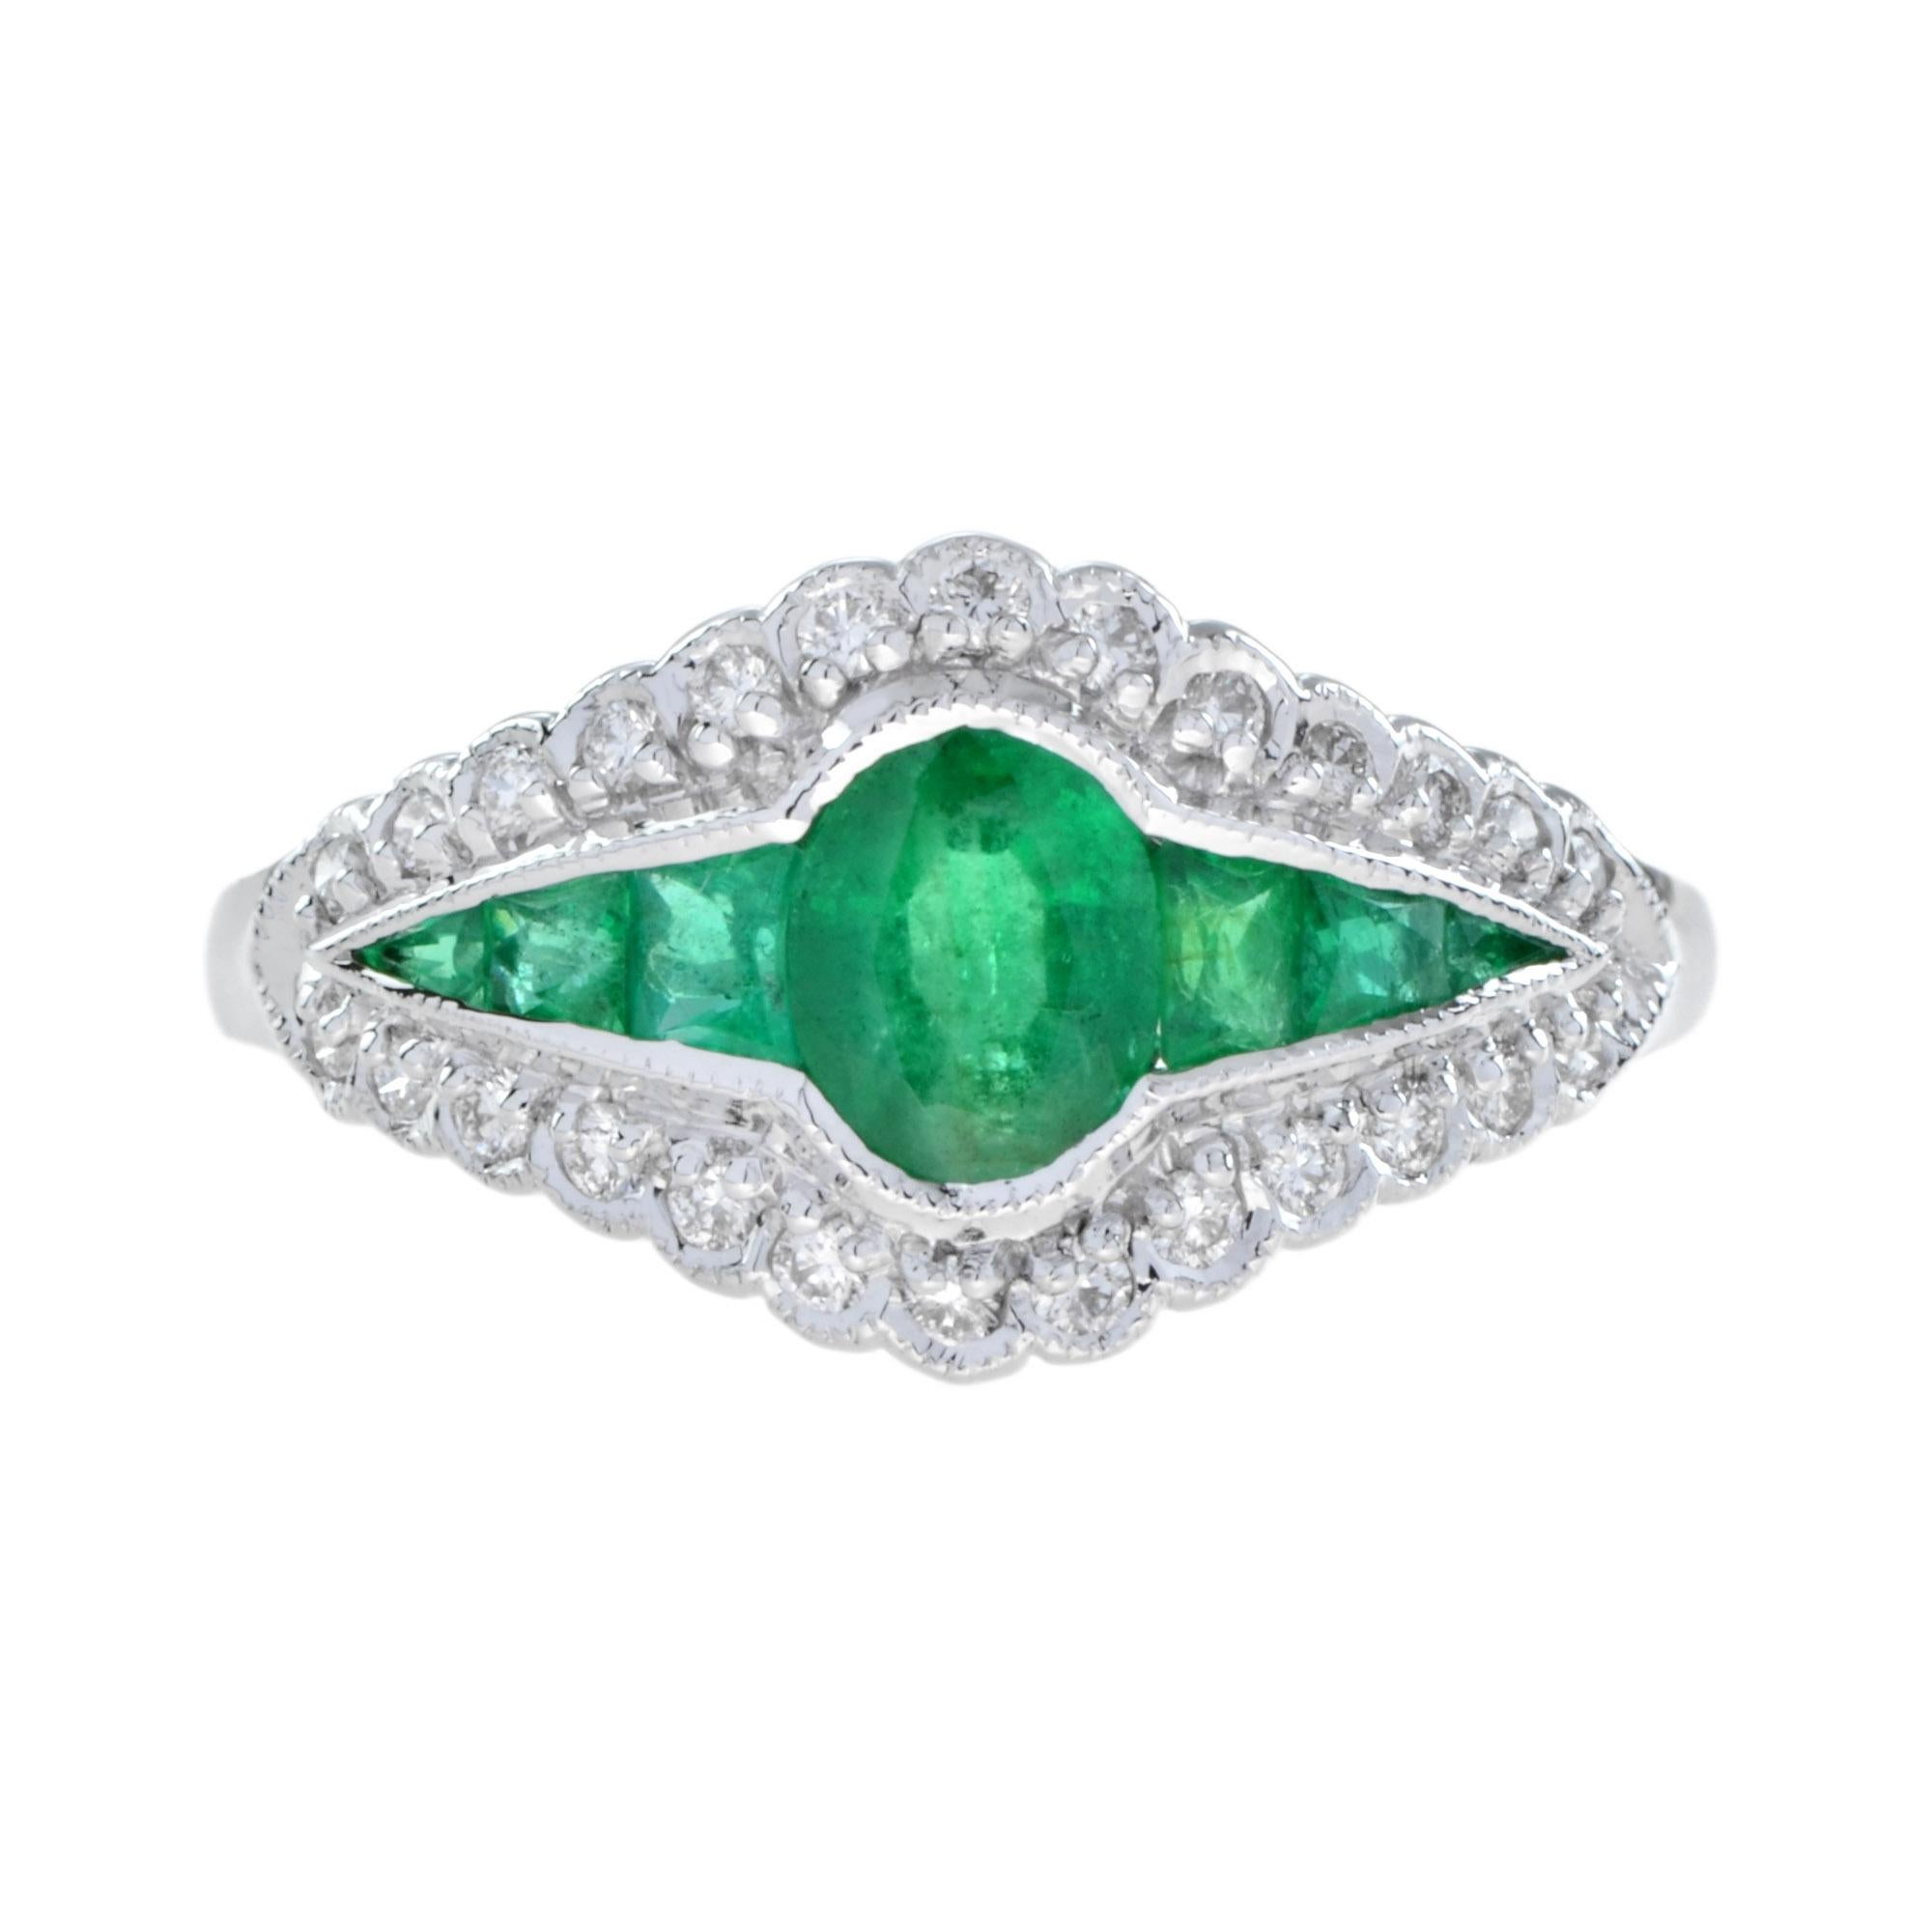 For Sale:  Catherine Lace Natural Emerald and Diamond Art Deco Style Halo Ring in 18K Gold 2